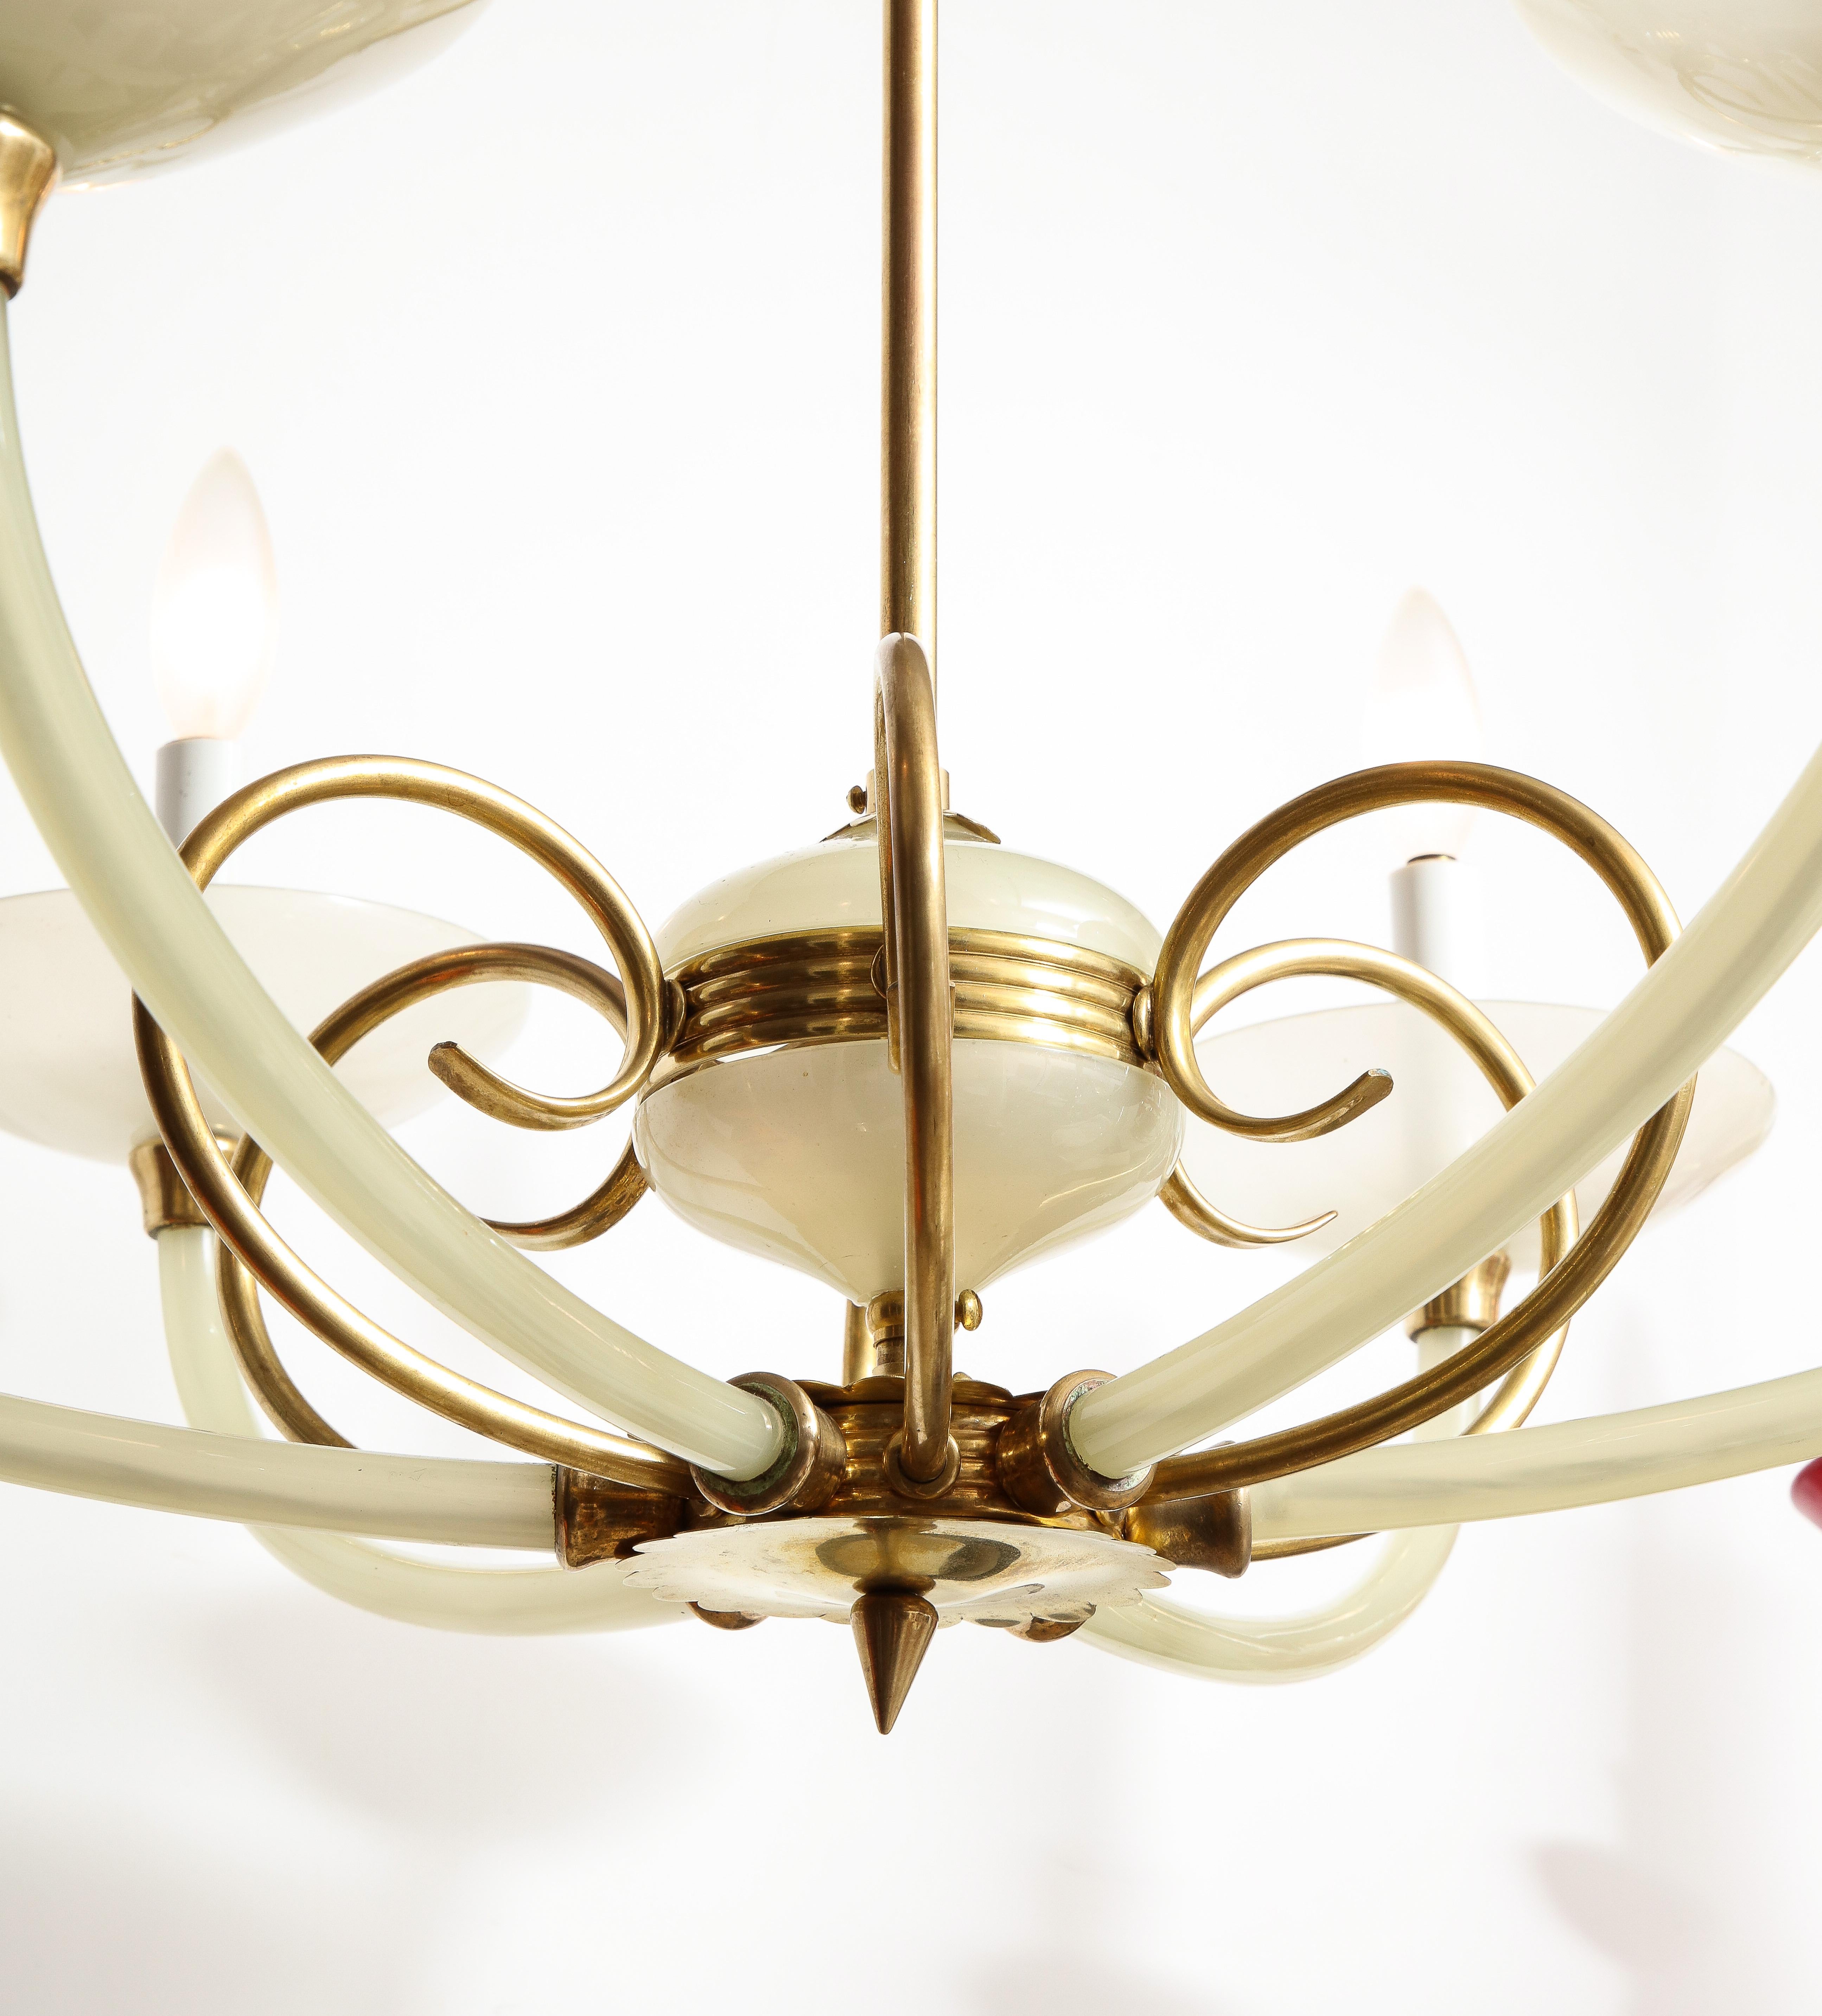 Mid-20th Century Italian Opaline Glass and Brass Six Arm Chandelier, Italy, circa 1950 For Sale